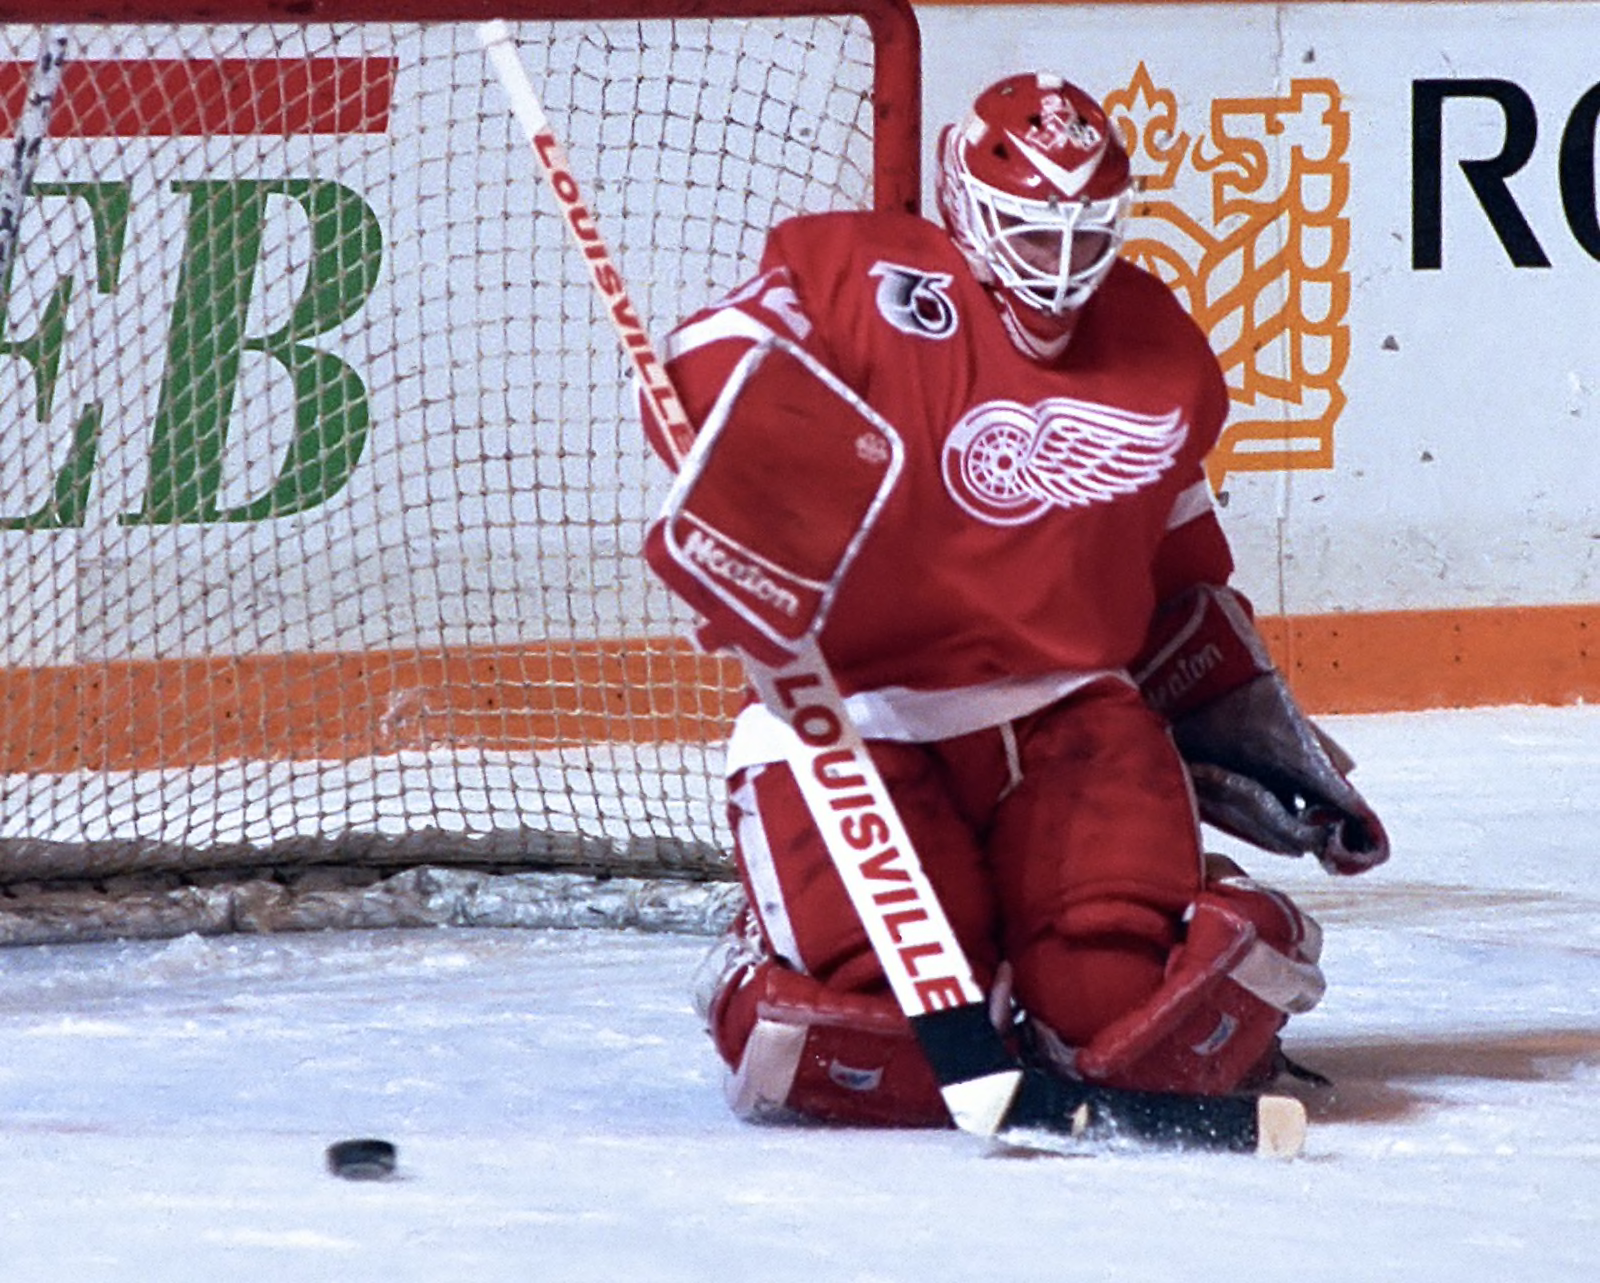 1991 Detroit Red Wings Tim Cheveldae - Historic Images